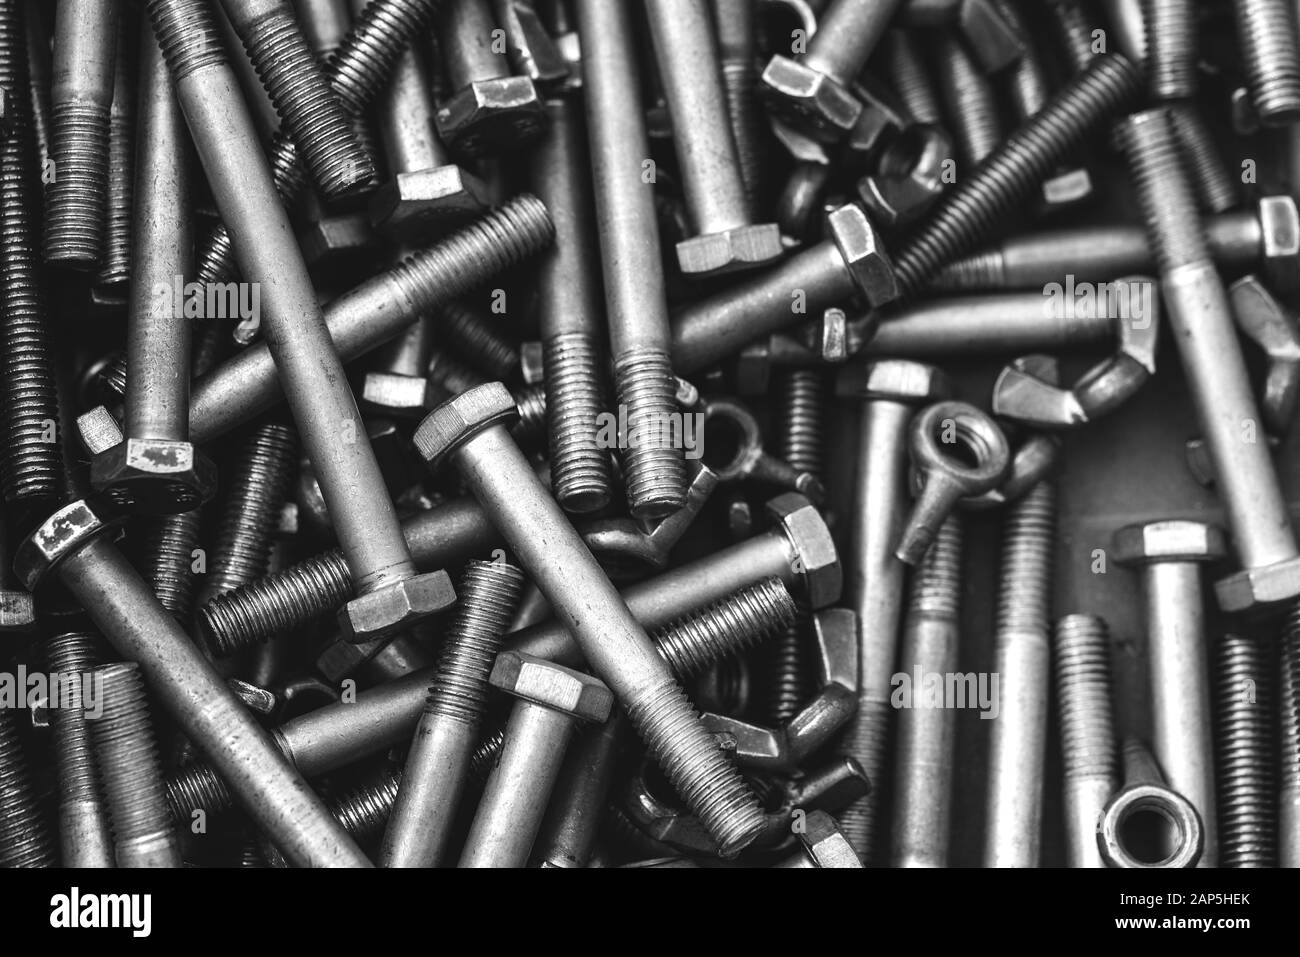 Long stainless steel bolts. Silver color metal parts. View from above Stock Photo